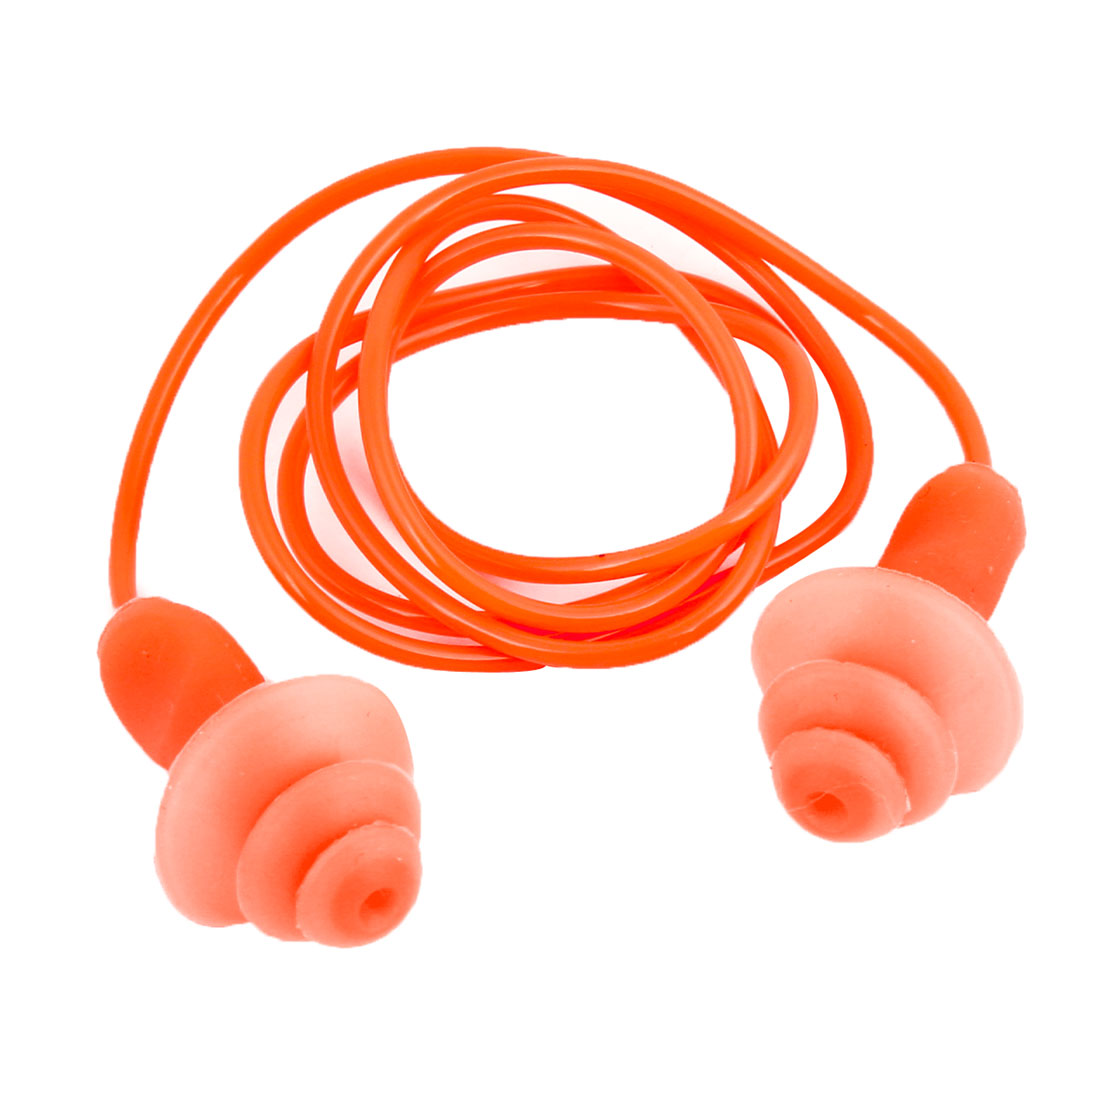 Unique Bargains Corded Ear Waterproof Soft Silicone Swimming Ear Plugs For Adults Youth